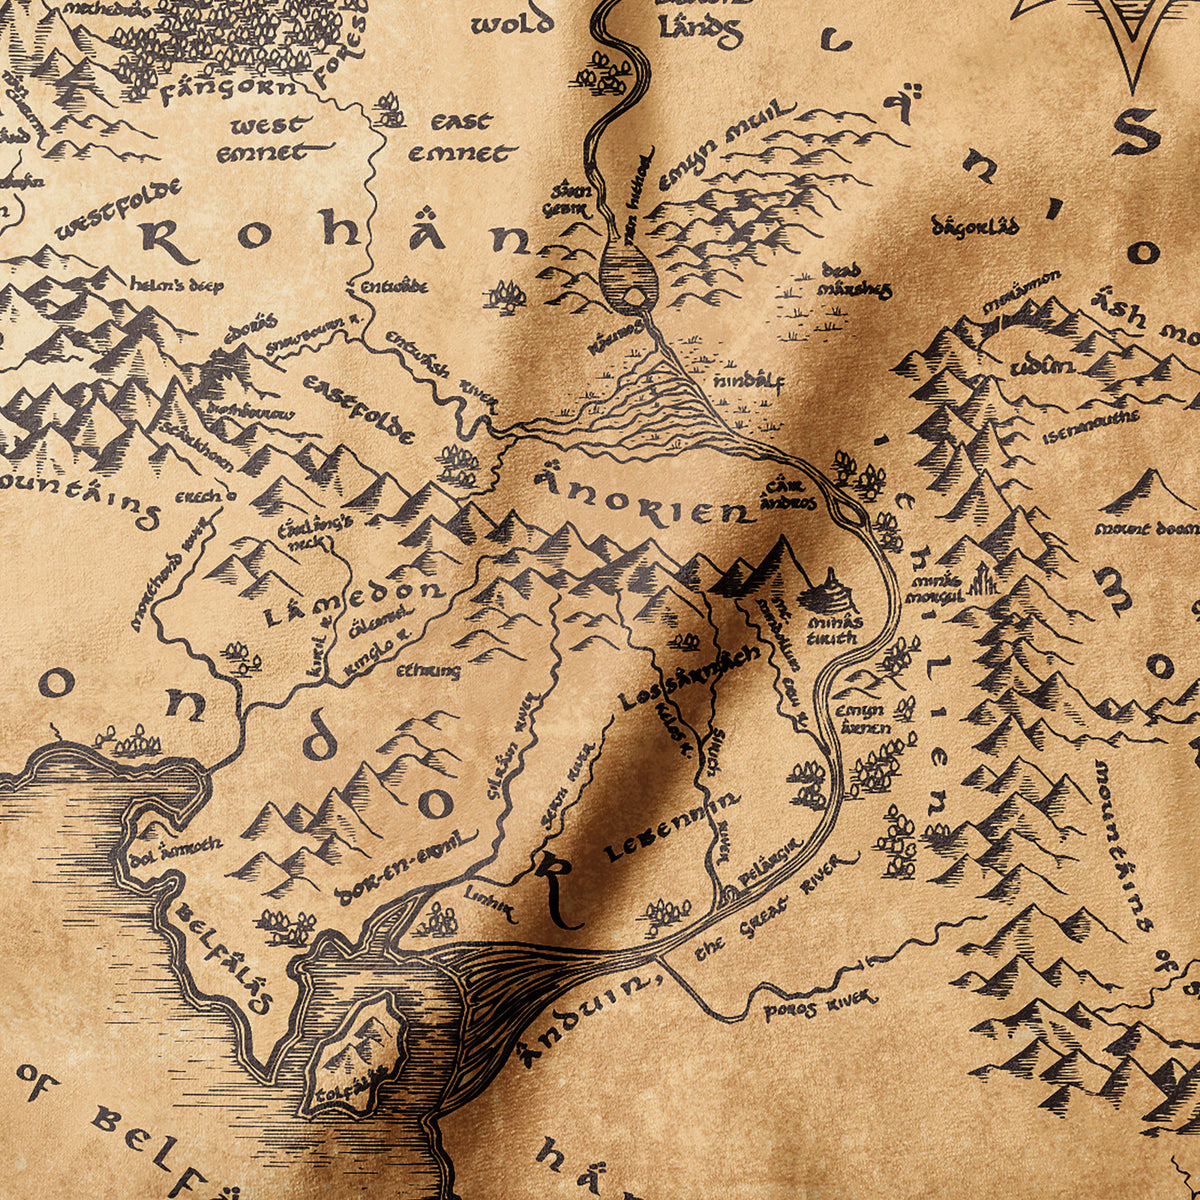 Lord of the Rings - Middle Earth Map